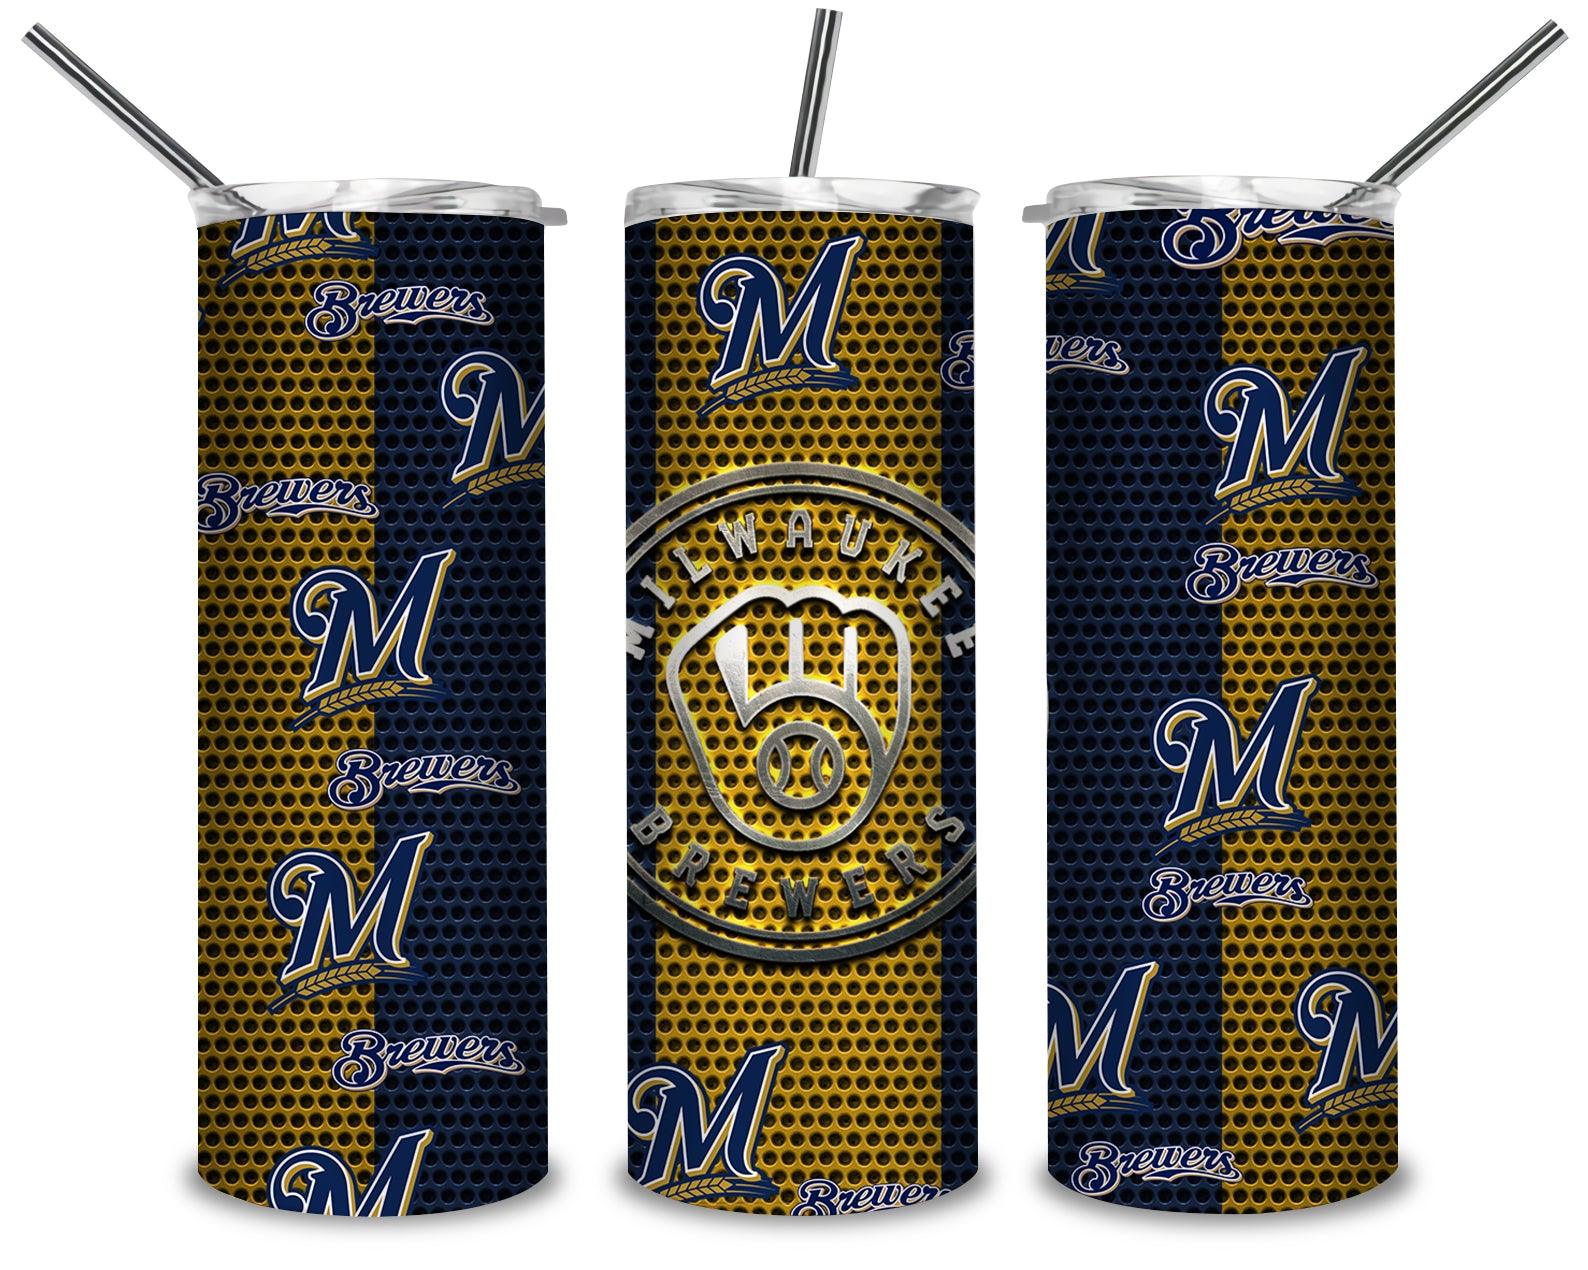 Milwaukee Brewers PNG, Brewers Logos 20oz Skinny Tumbler Designs PNG, Sublimation Designs PNG - TheDigitalSVG